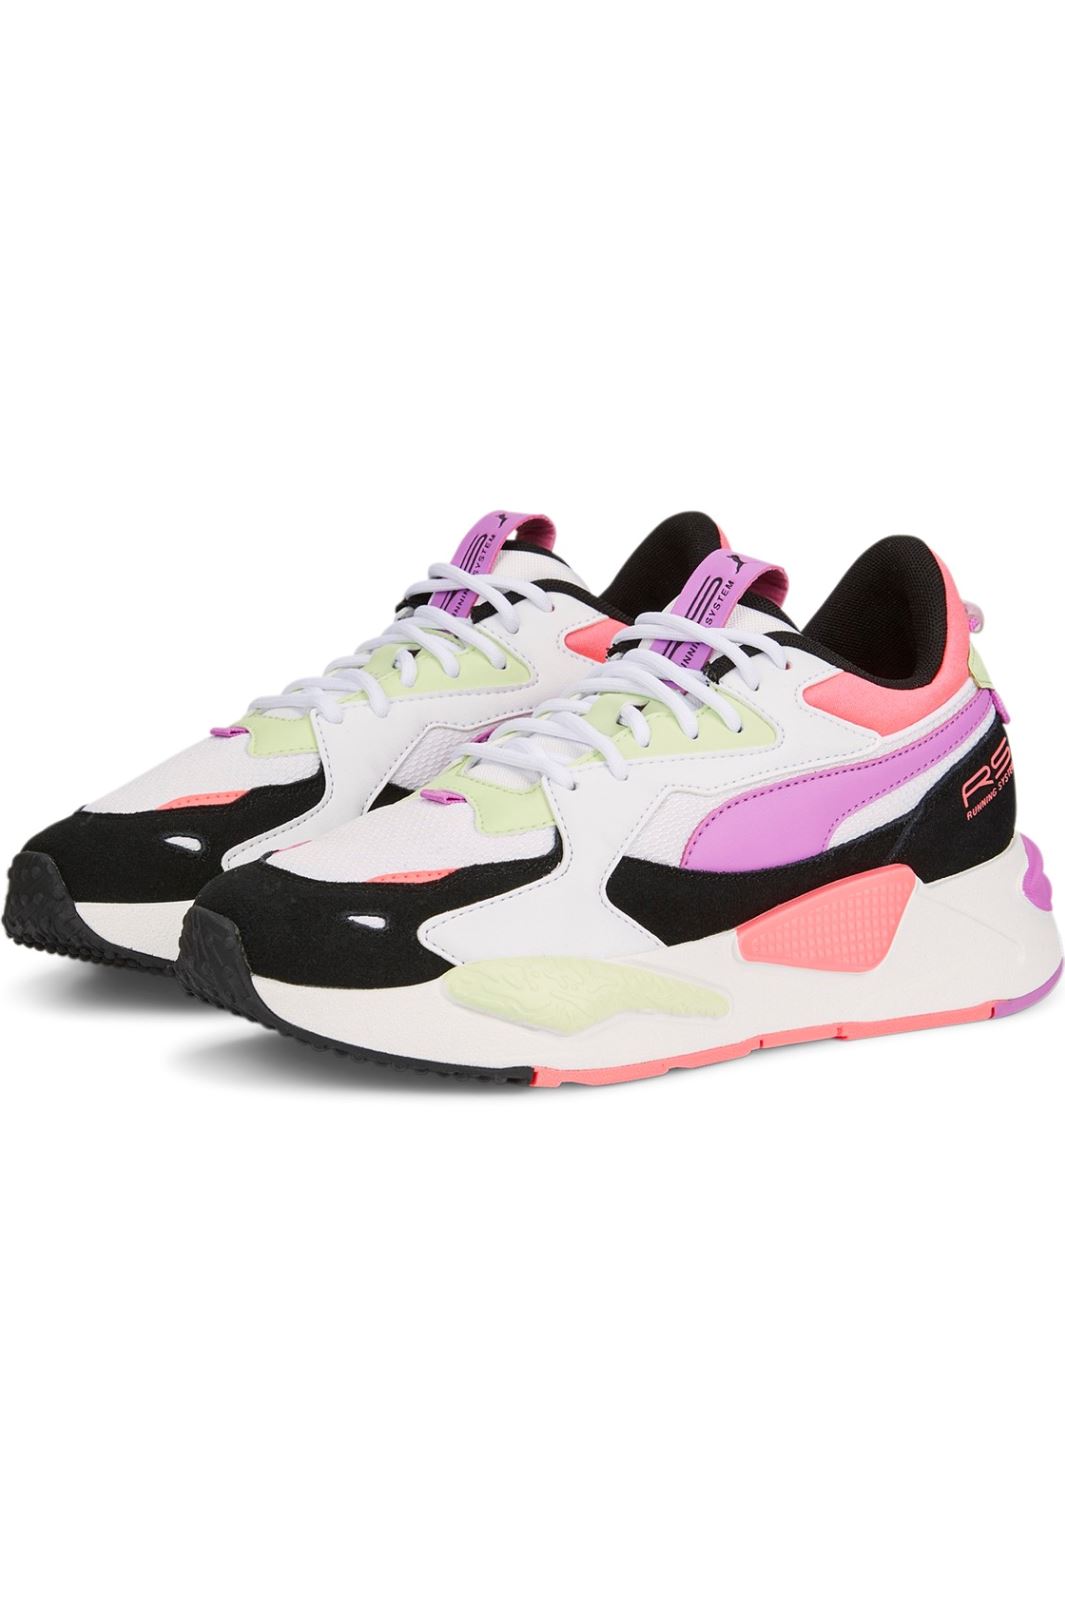 Puma - RS-Z Reinvent Wns - White Sunset 12 Sneakers 